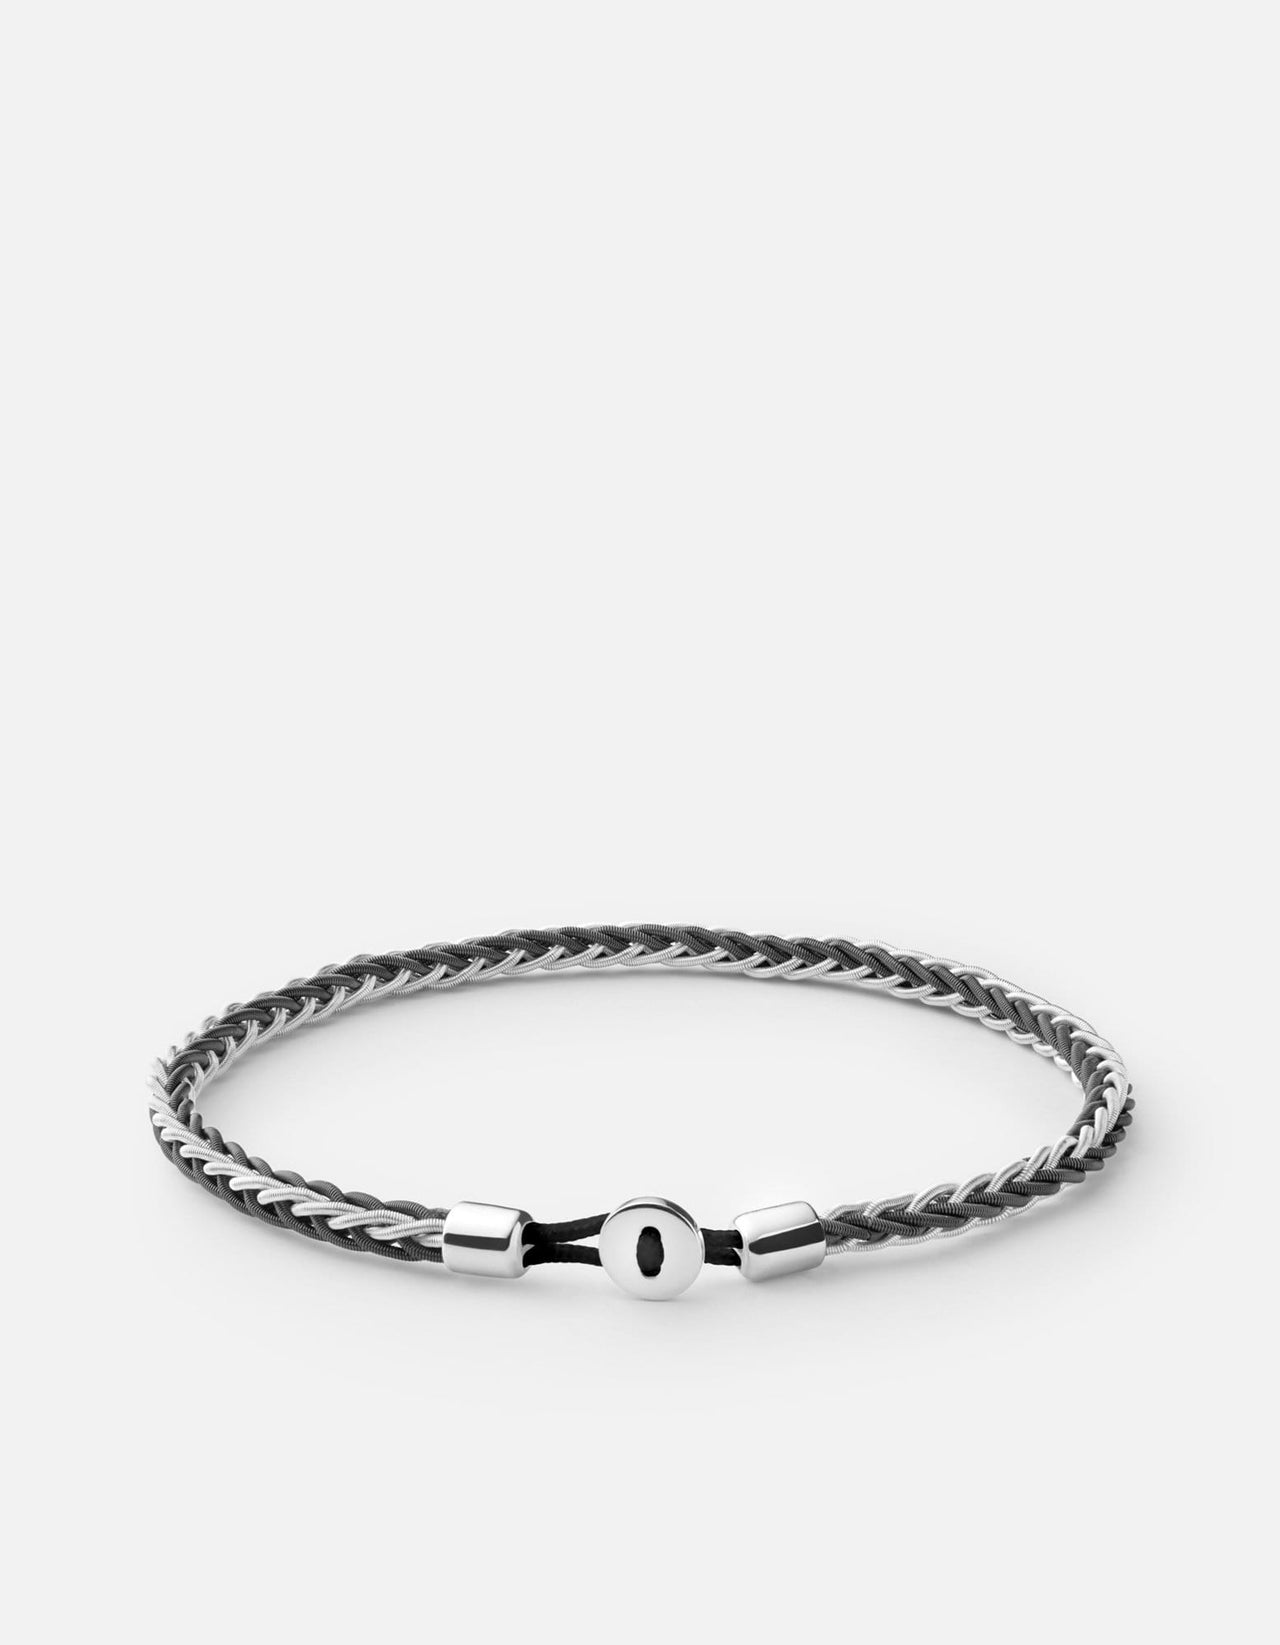 Piano Wire Bracelets, Sleeved Silver